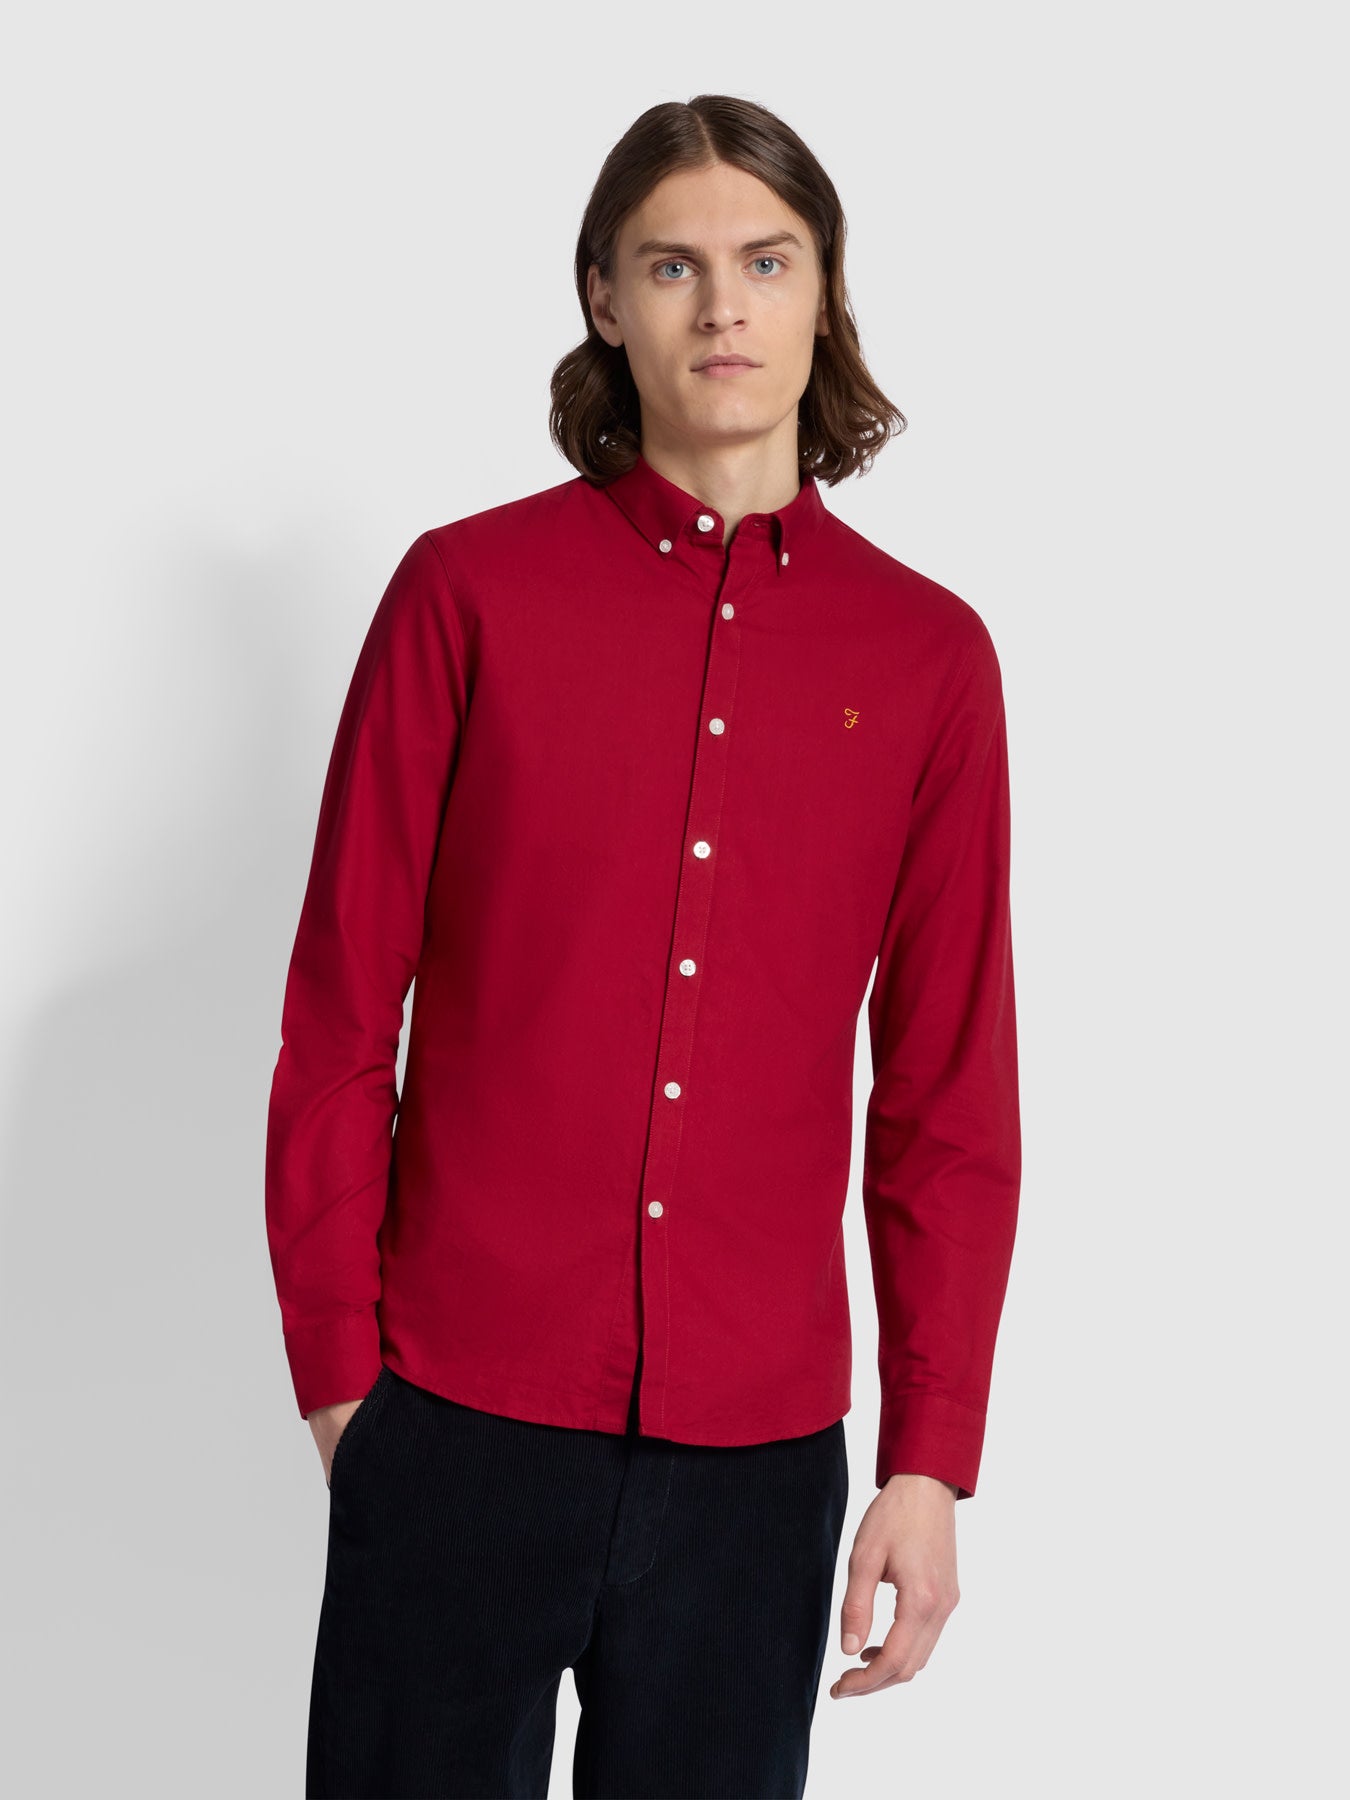 View Brewer Slim Fit Organic Cotton Oxford Shirt In Warm Red information